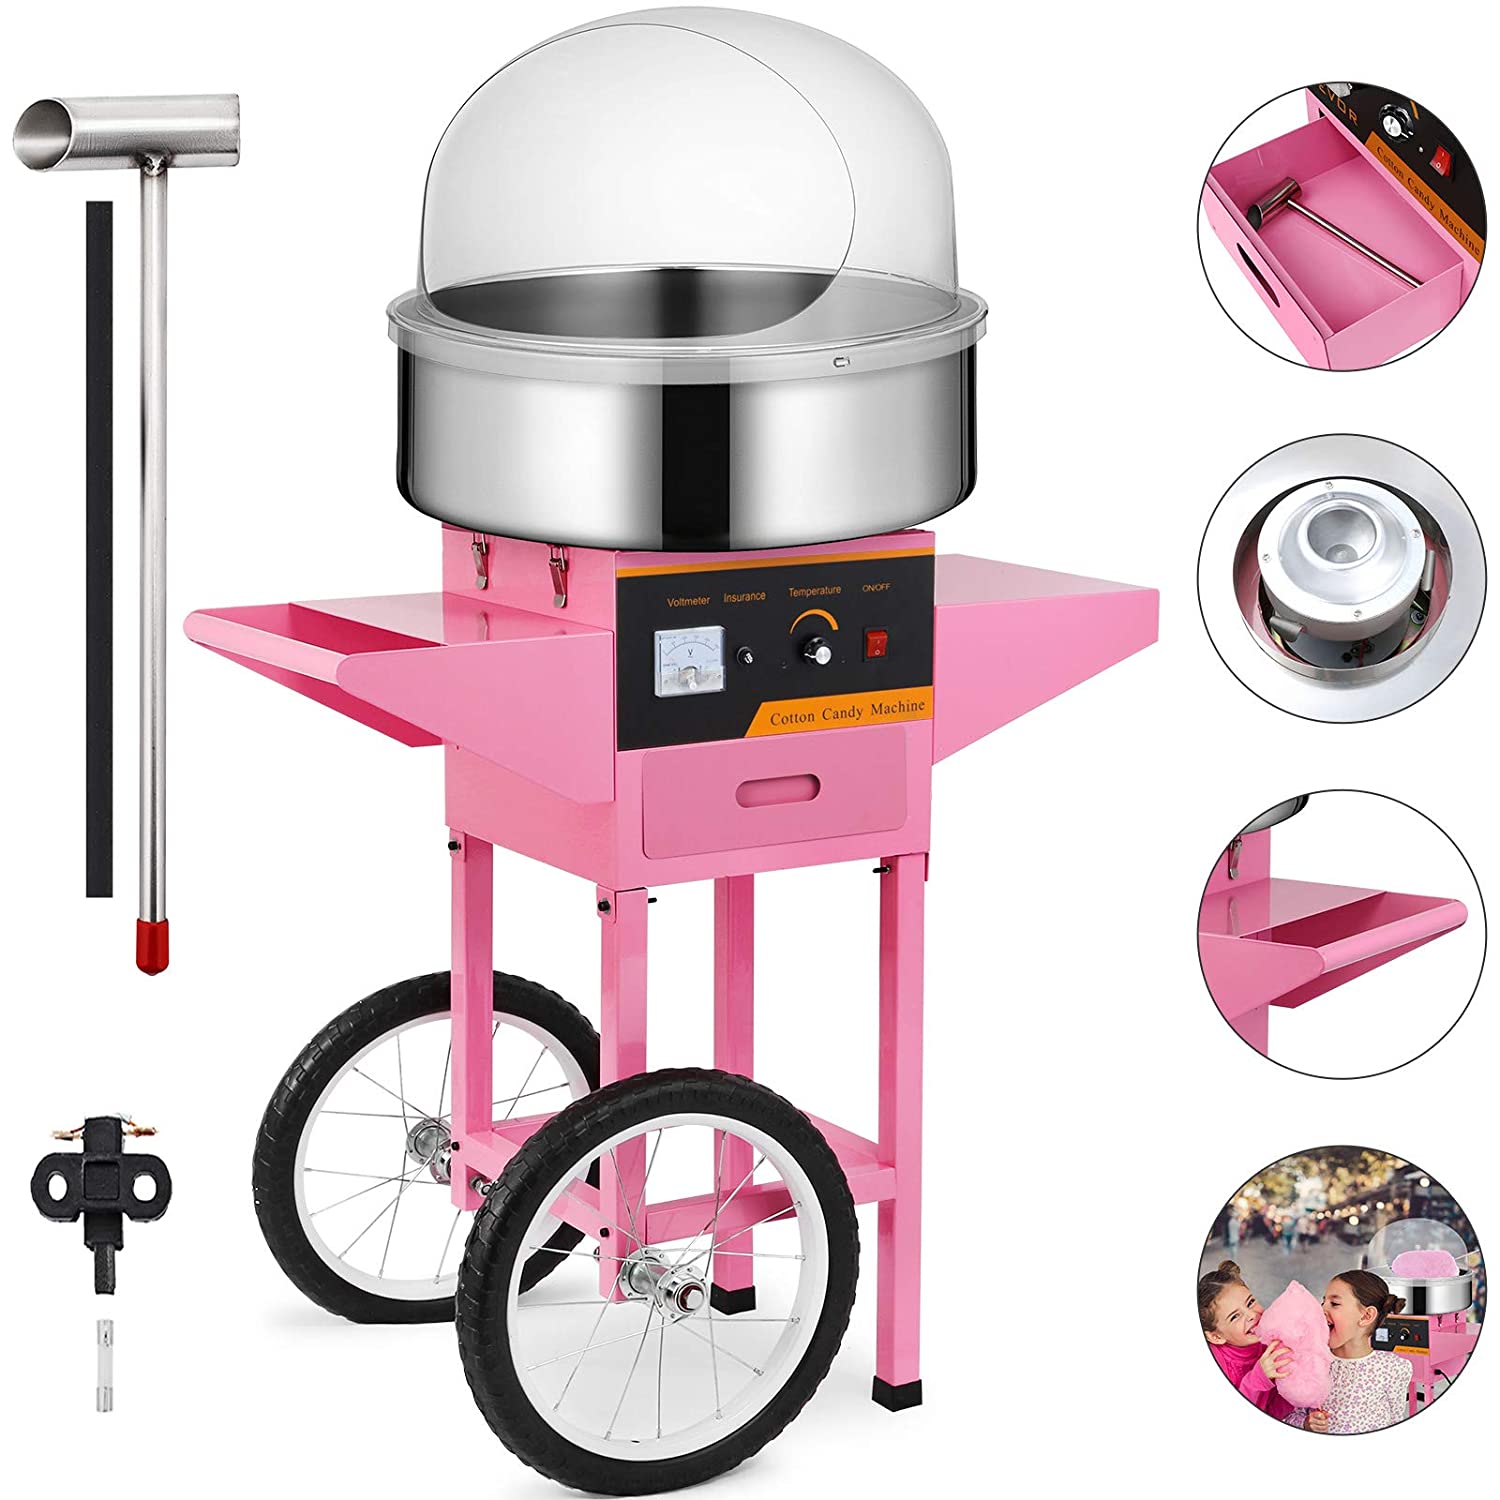 Happybuy Electric Candy Floss Maker 20.5 Inch Cotton Candy Machine with Cart and Cover 1030W for Various 